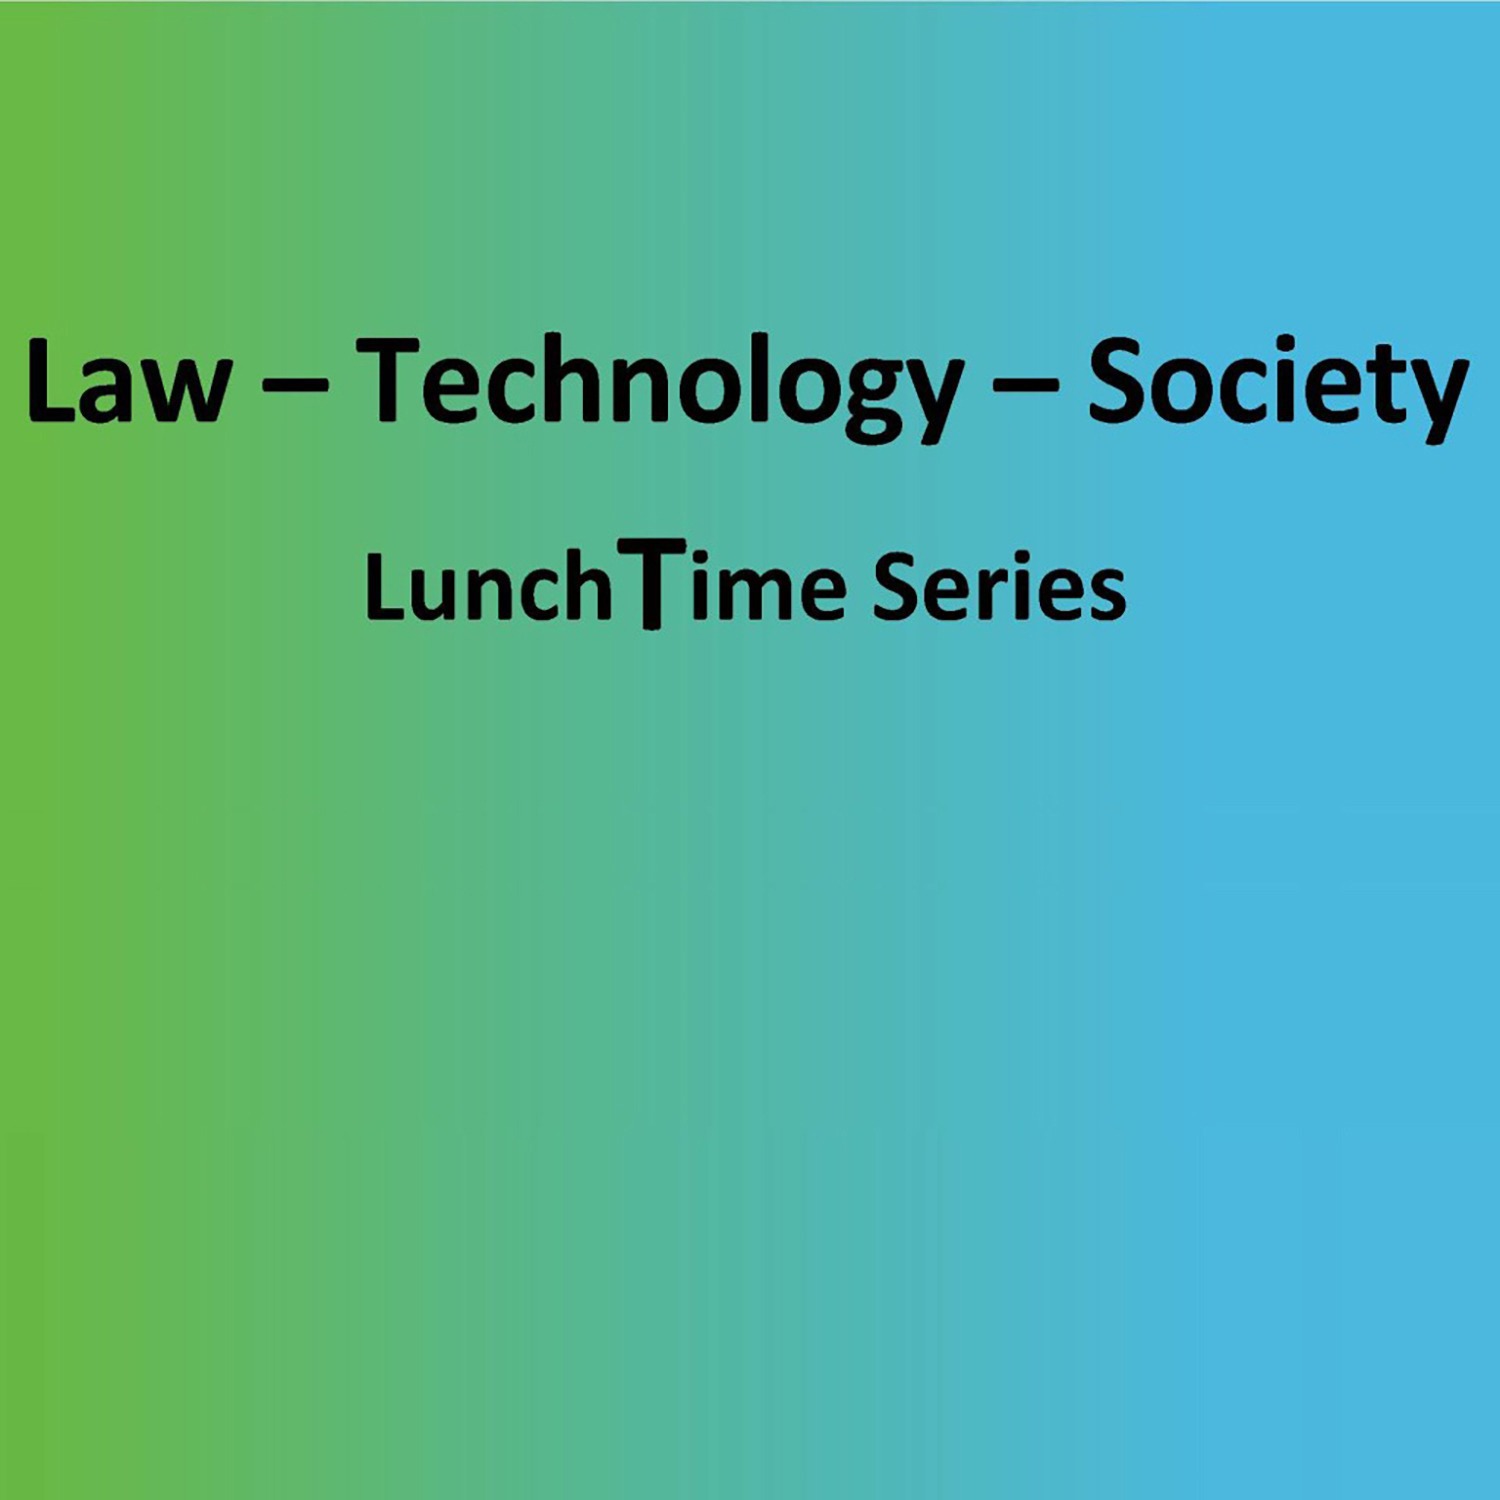 Vortragsreihe WiSe 16: Law – Technology – Society